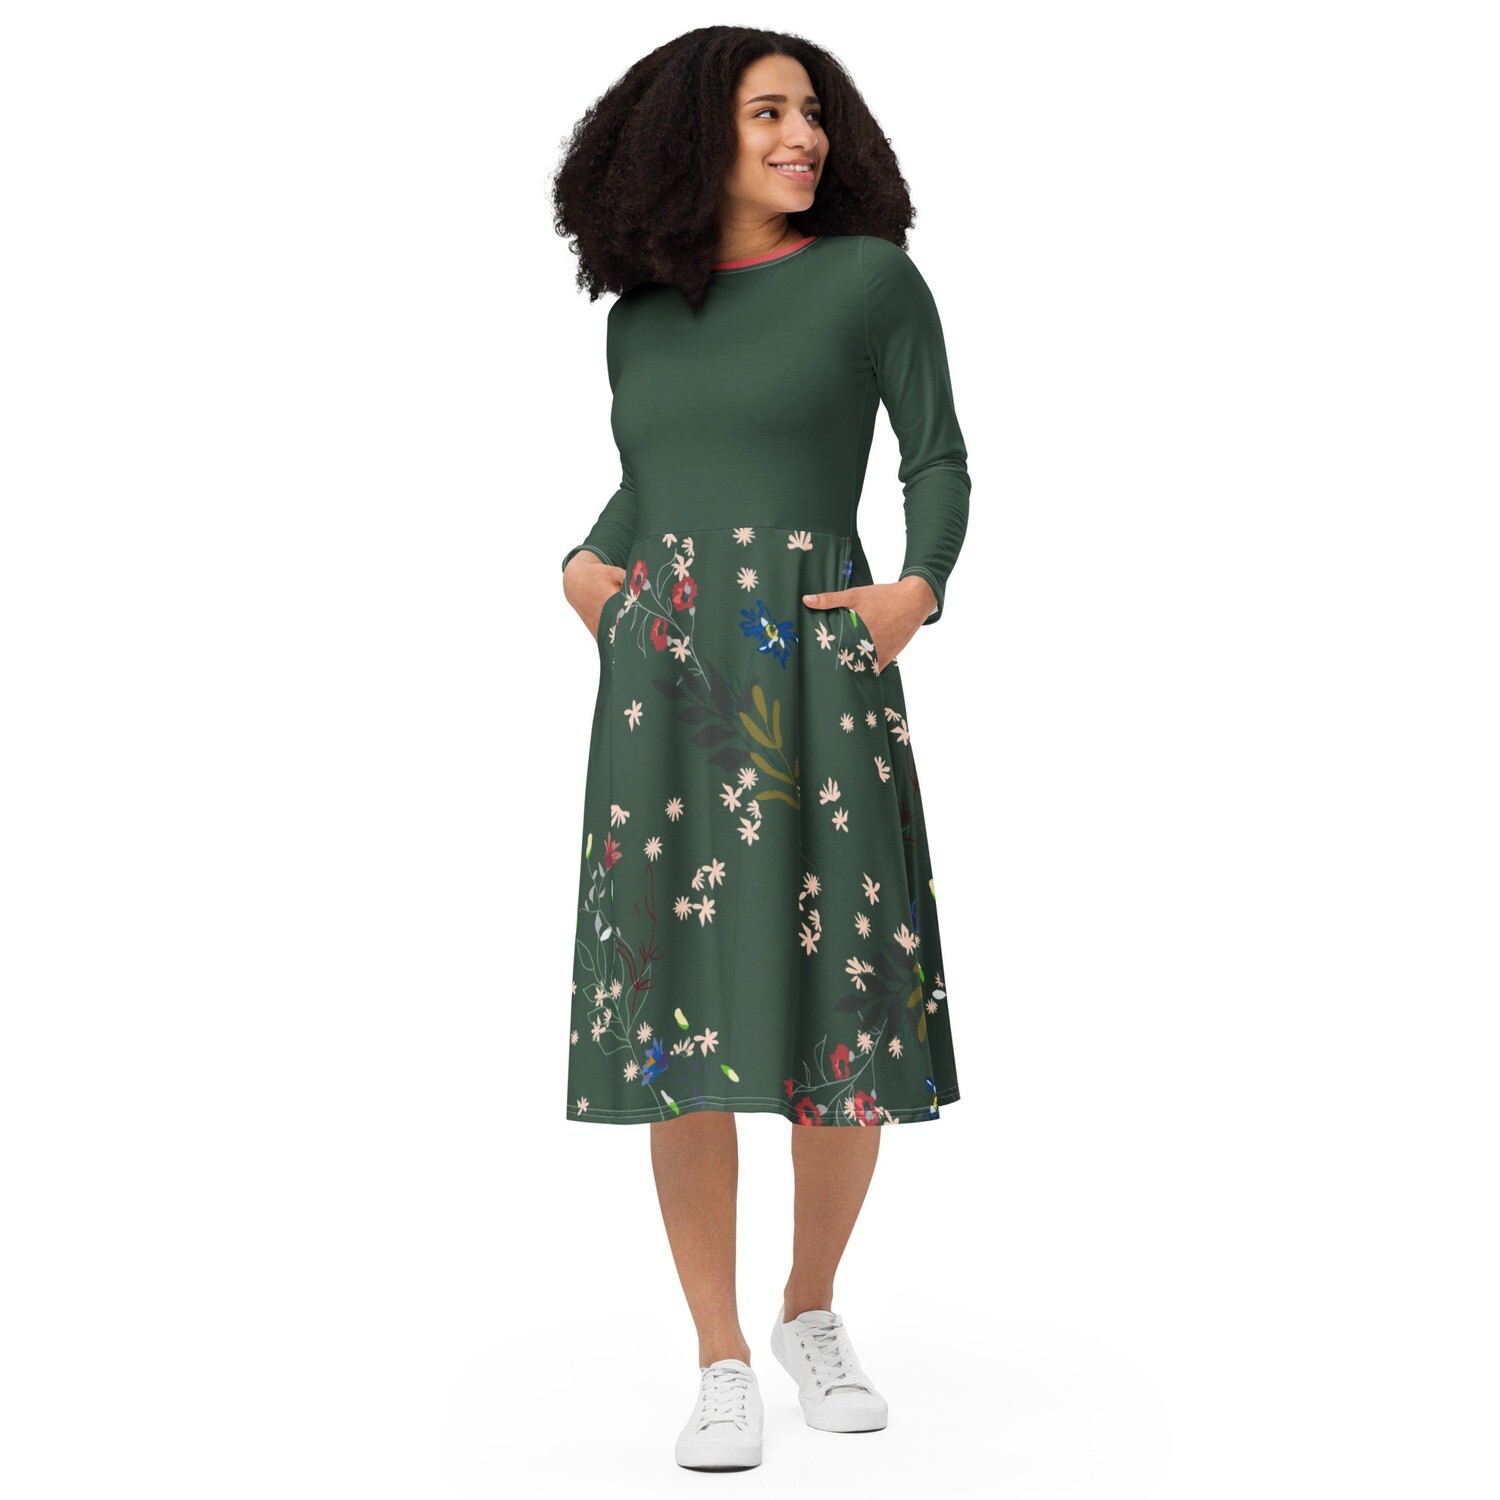 Olive green long-sleeve midi dress with retro red collar and meadow flowers on the bottom half